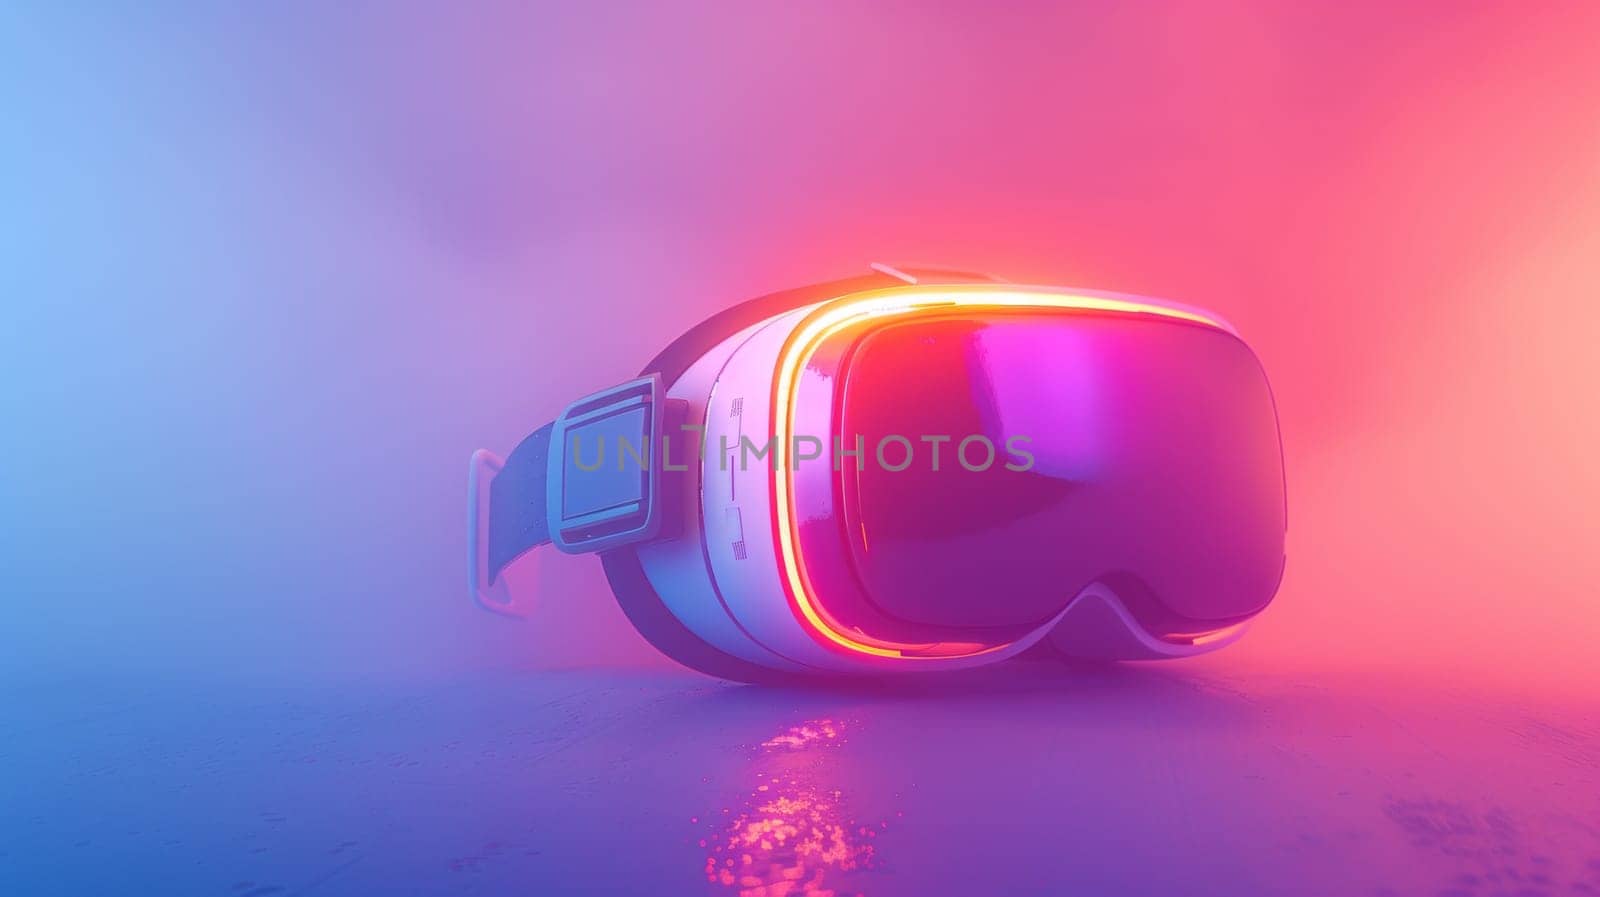 A close up of a pair of goggles on top of some foggy background, AI by starush